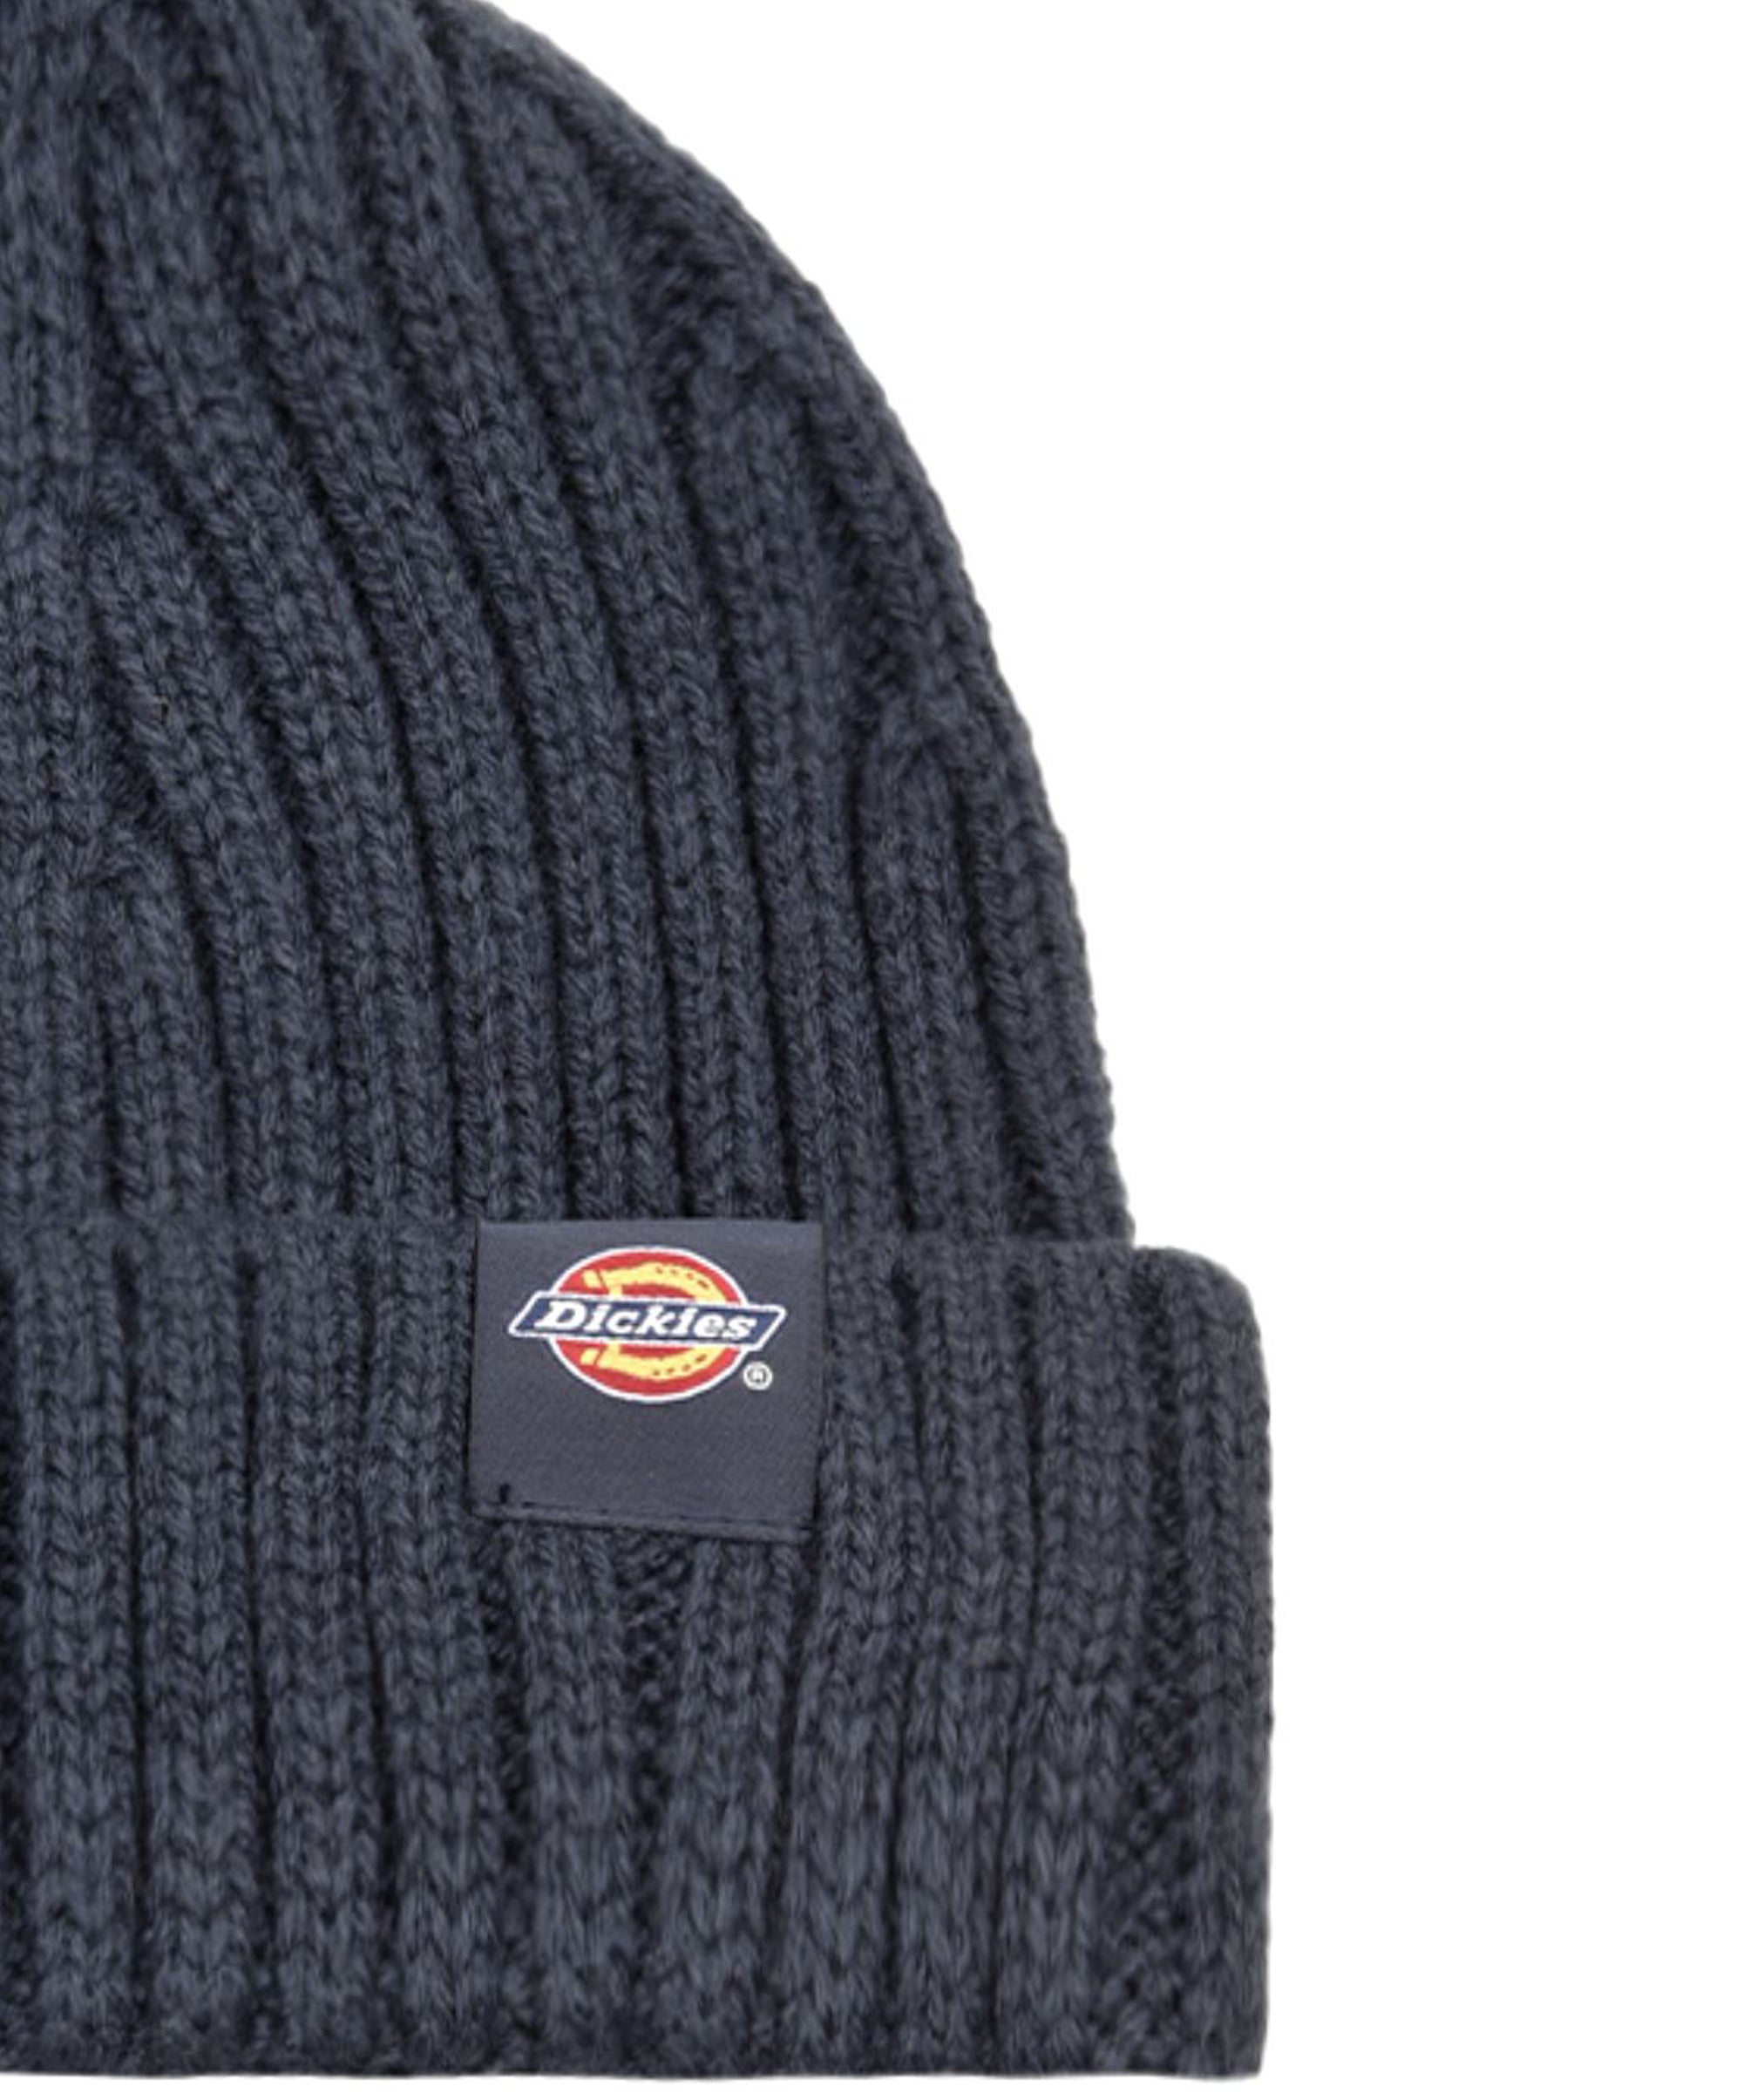 Cappello DICKIES Uomo DK0A4YHP Blue